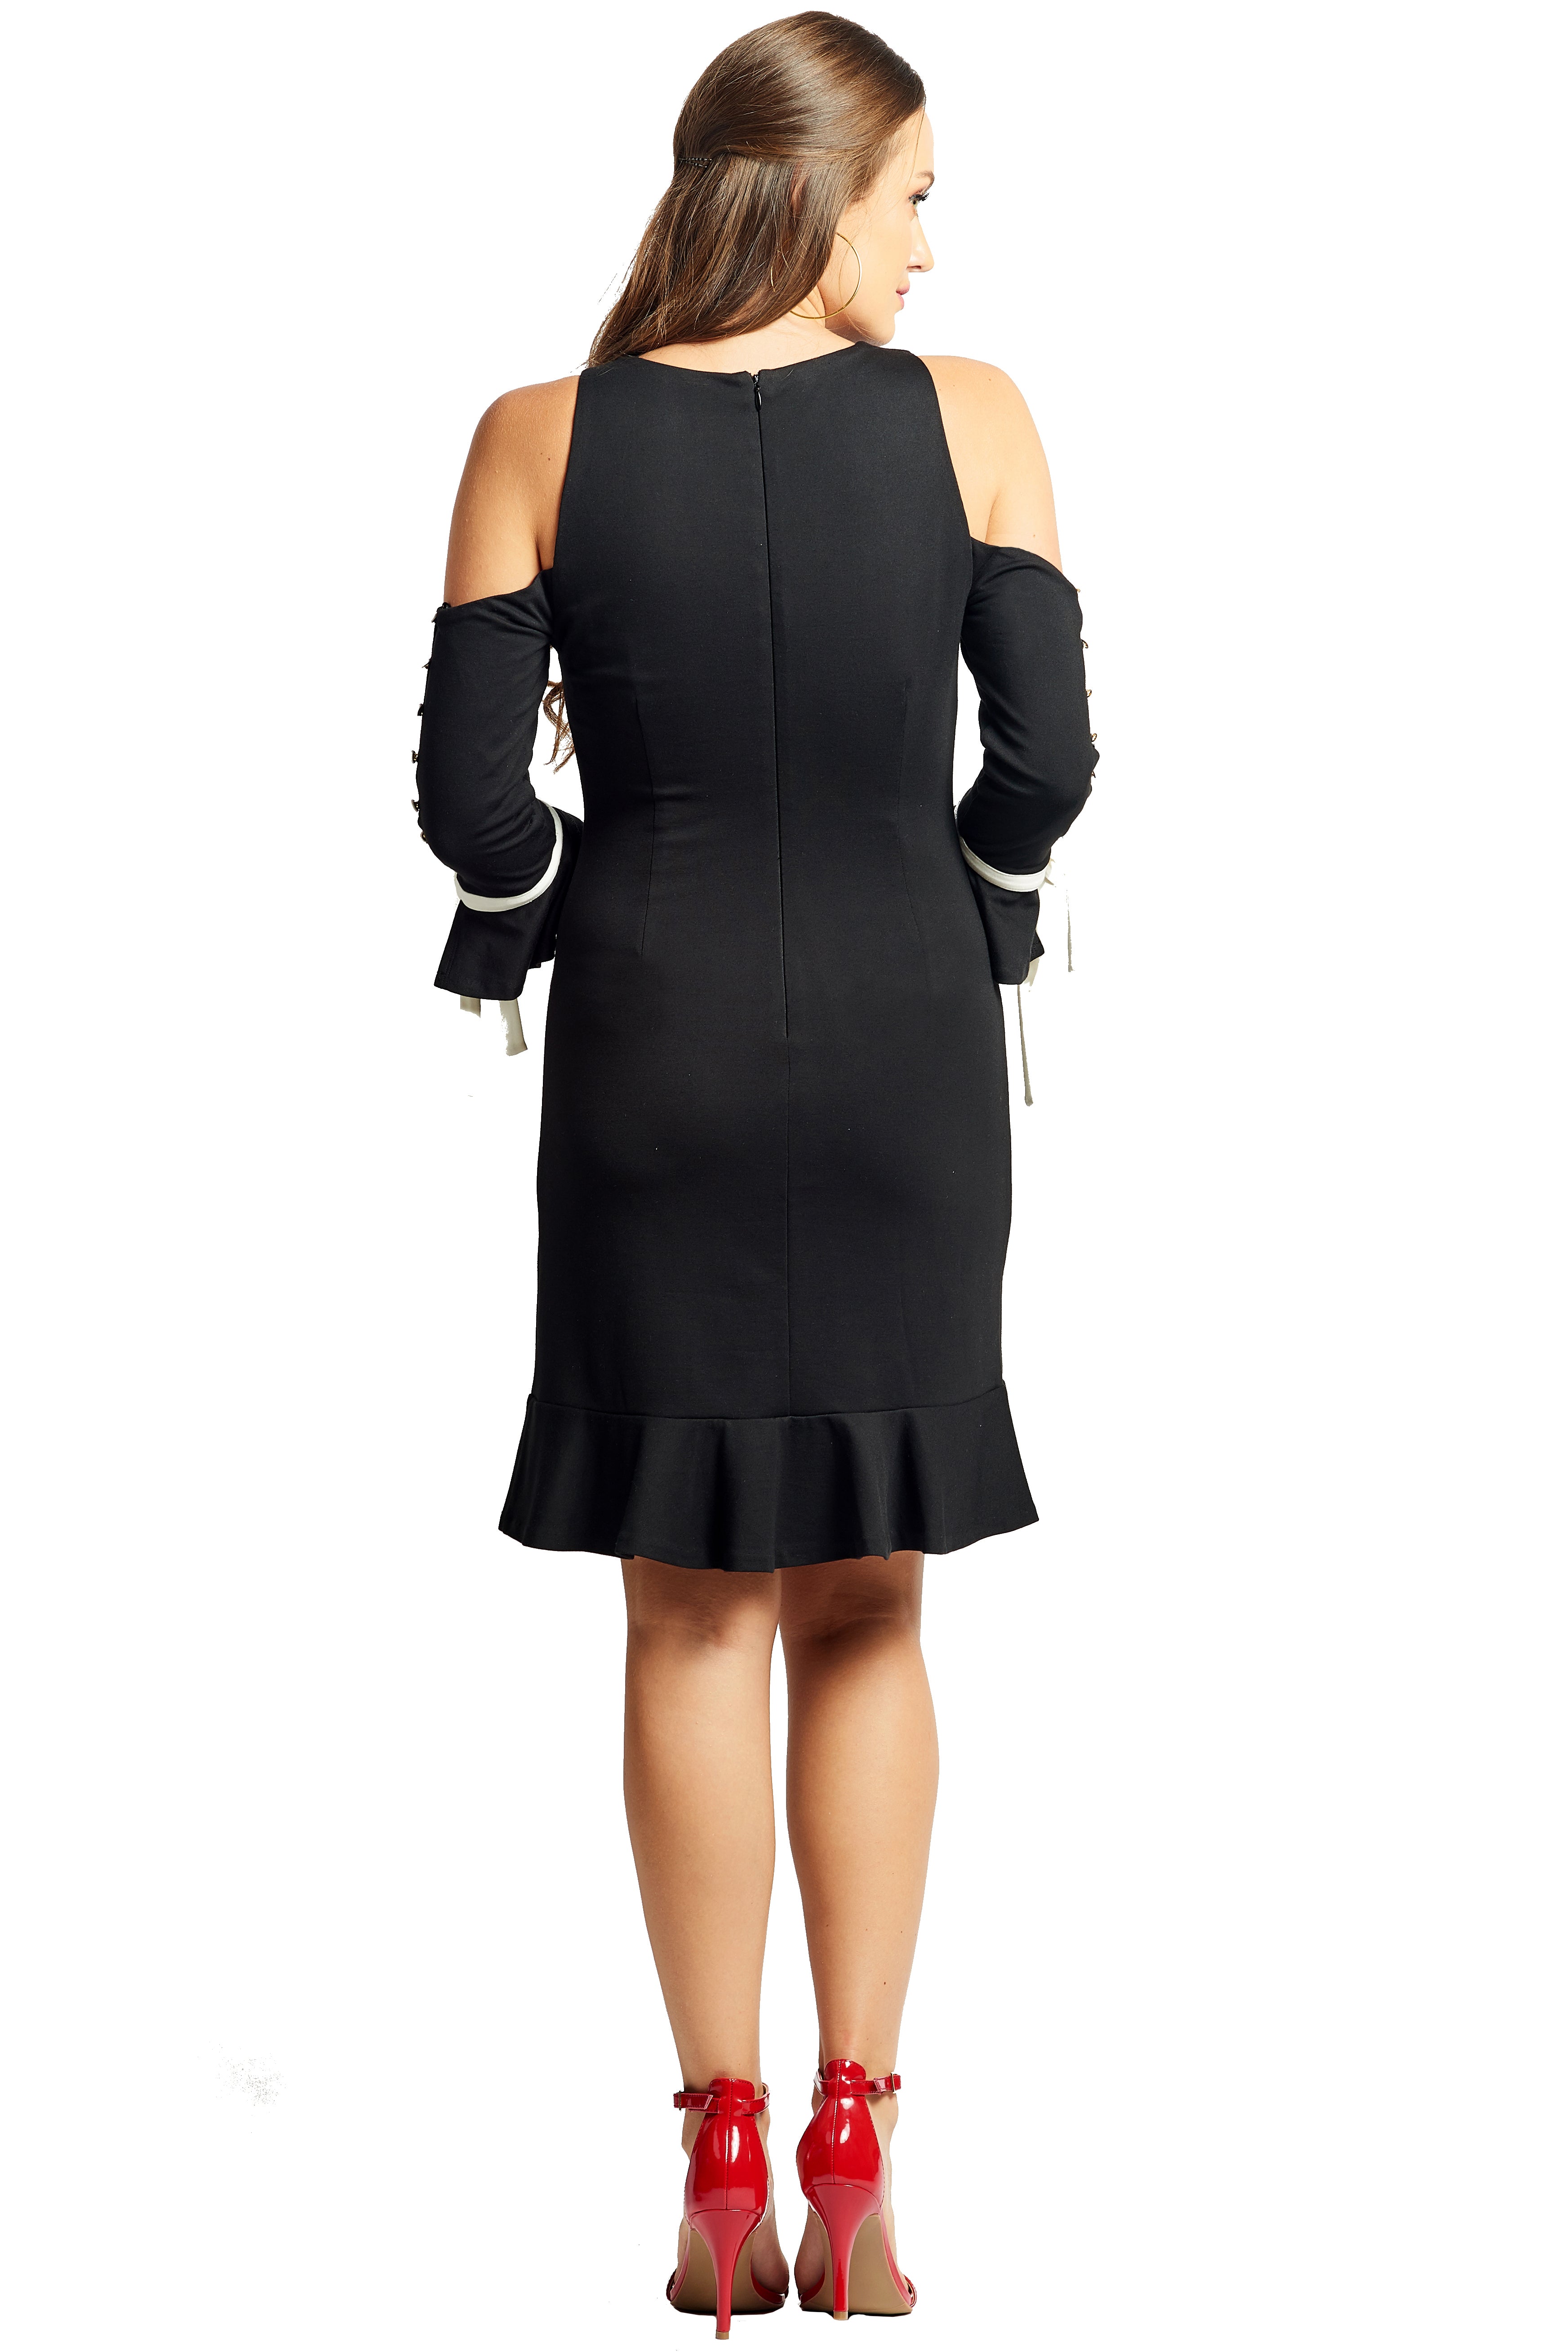 Back view of model wearing above the knee black knit Ponte cold shoulder three quarter sleeve dress with bowties at sleeves, and ruffles at hems.